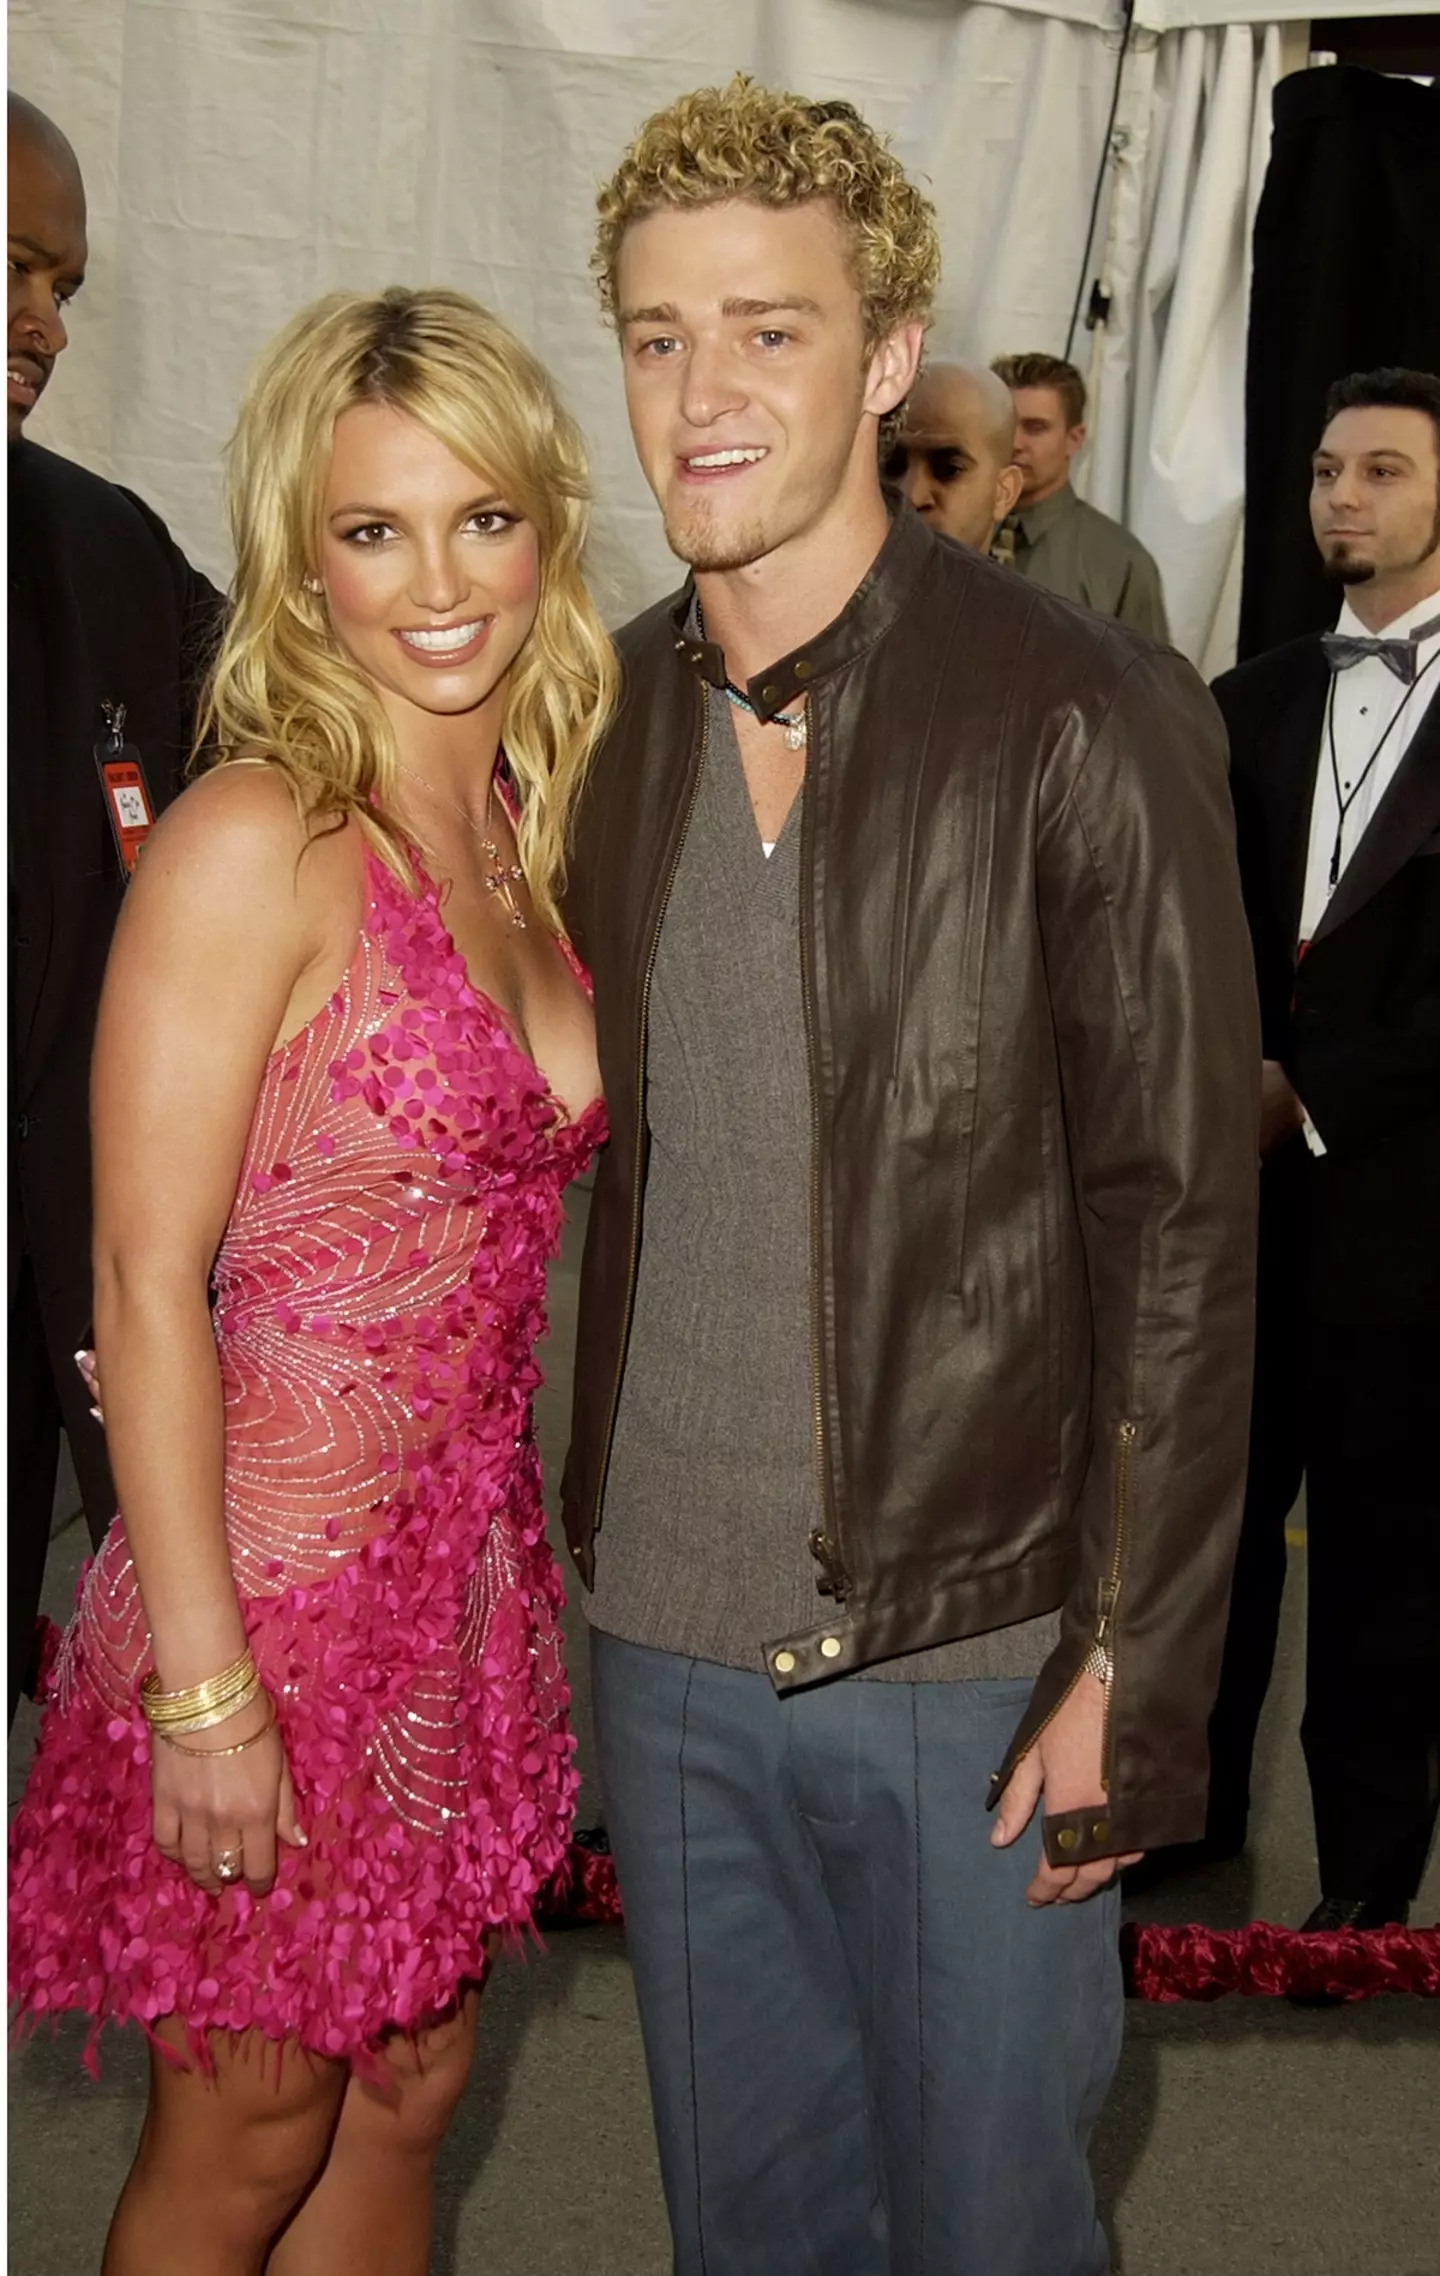 Britney Spears reveals she became pregnant with Justin's baby in the early 2000s.